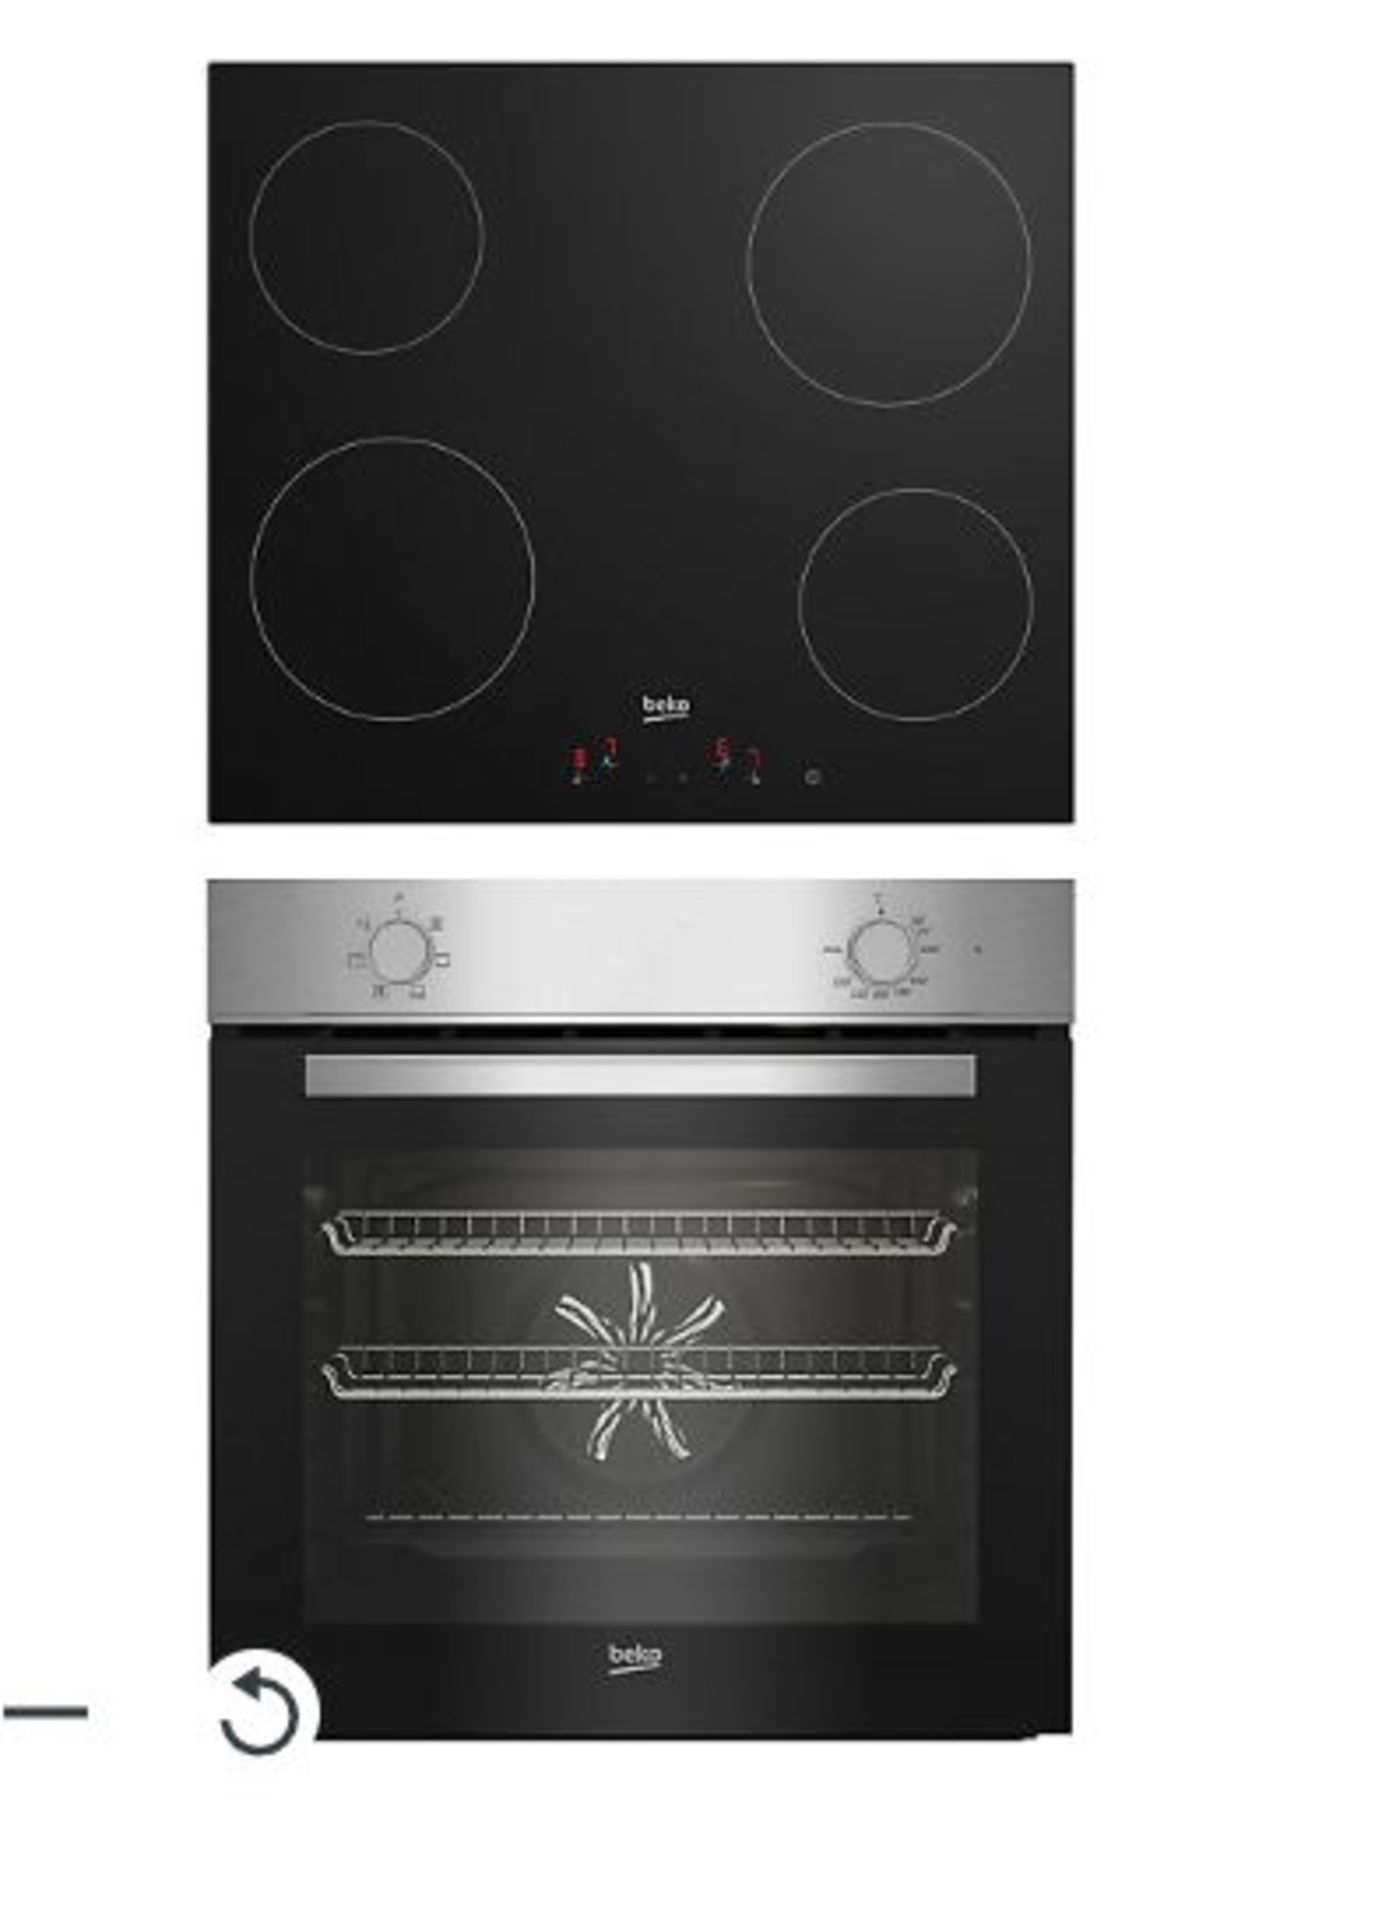 Beko QBSE222X Built-in Multifunction Oven & hob pack - Stainless steel. - ER45. Bake perfect